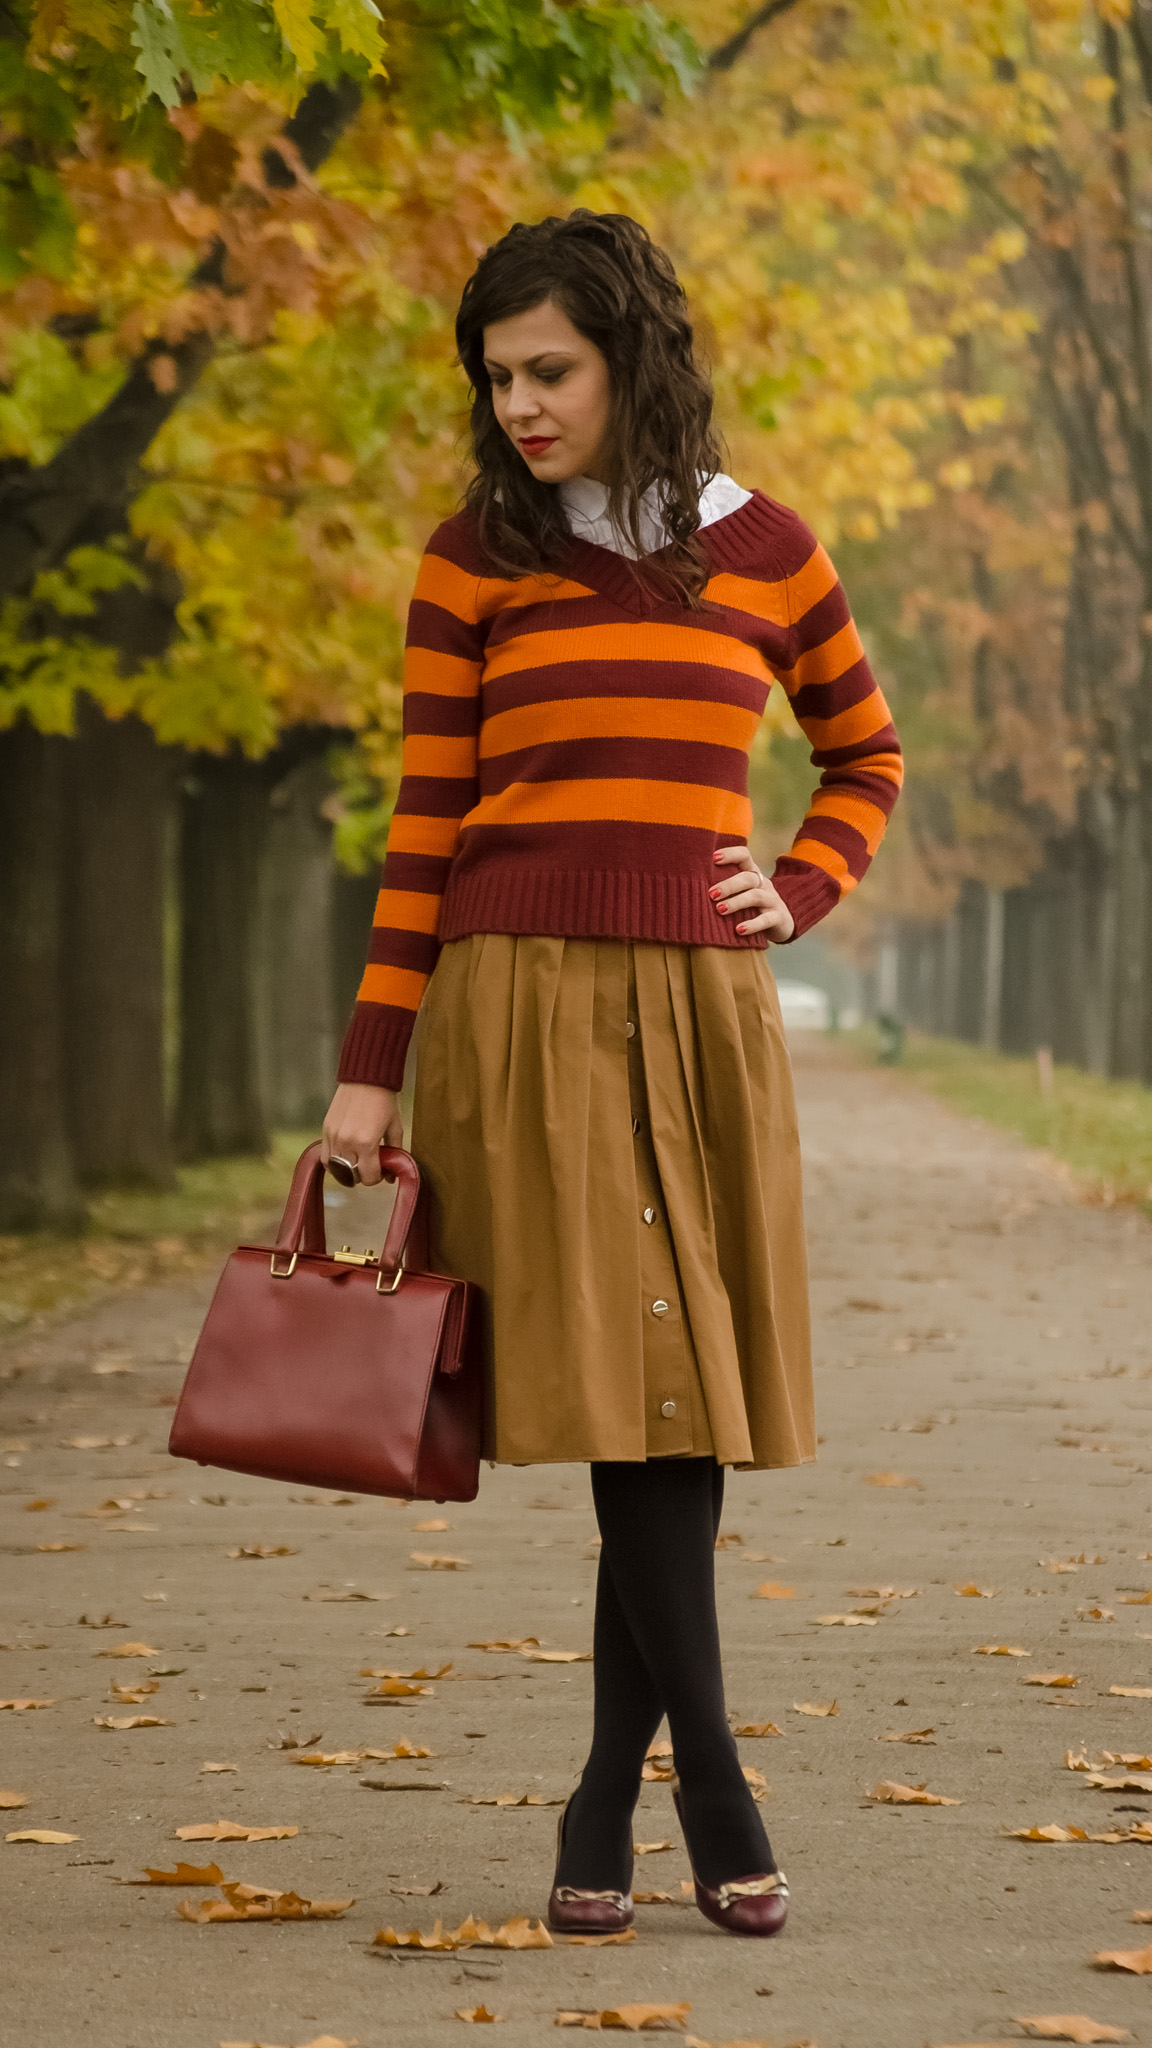 harry potter fall outfit brown skirt burgundy orange sweater shoes heels bag autumn scenery fallen leaves